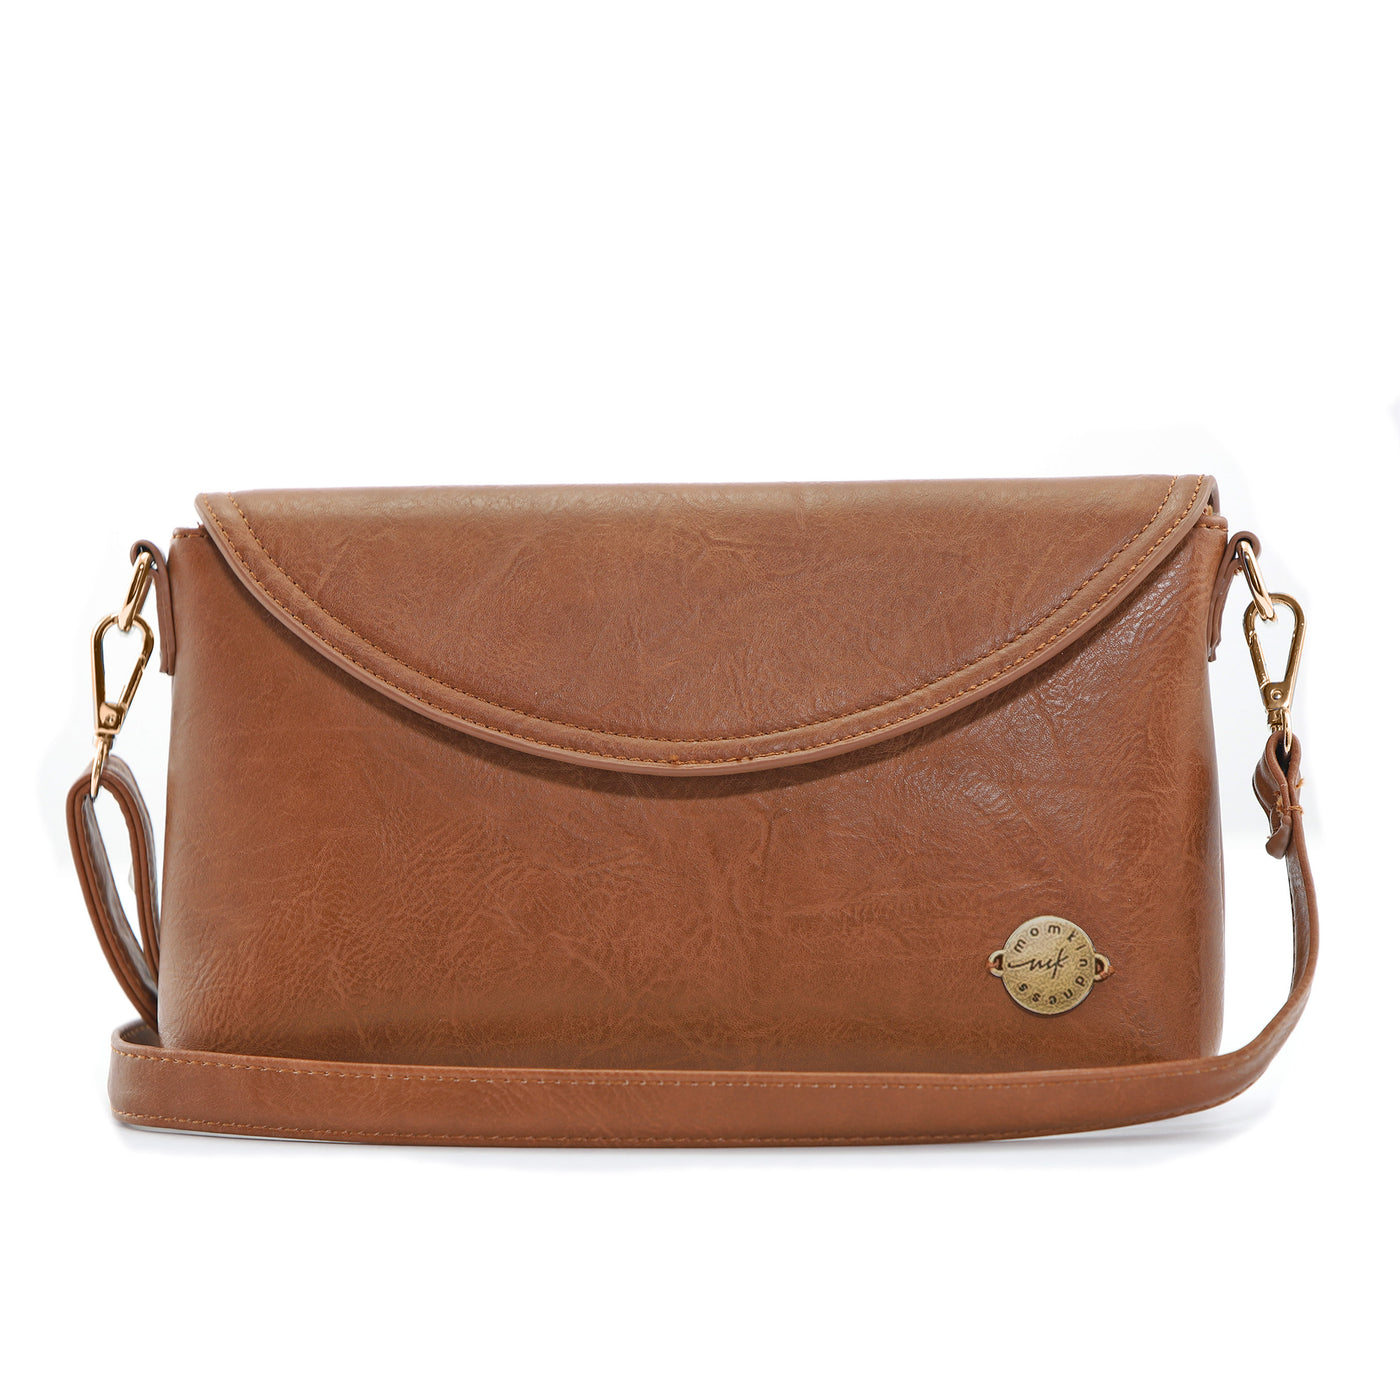 A caramel brown vegan leather crossbody clutch bag with rounded flap, on a white background.